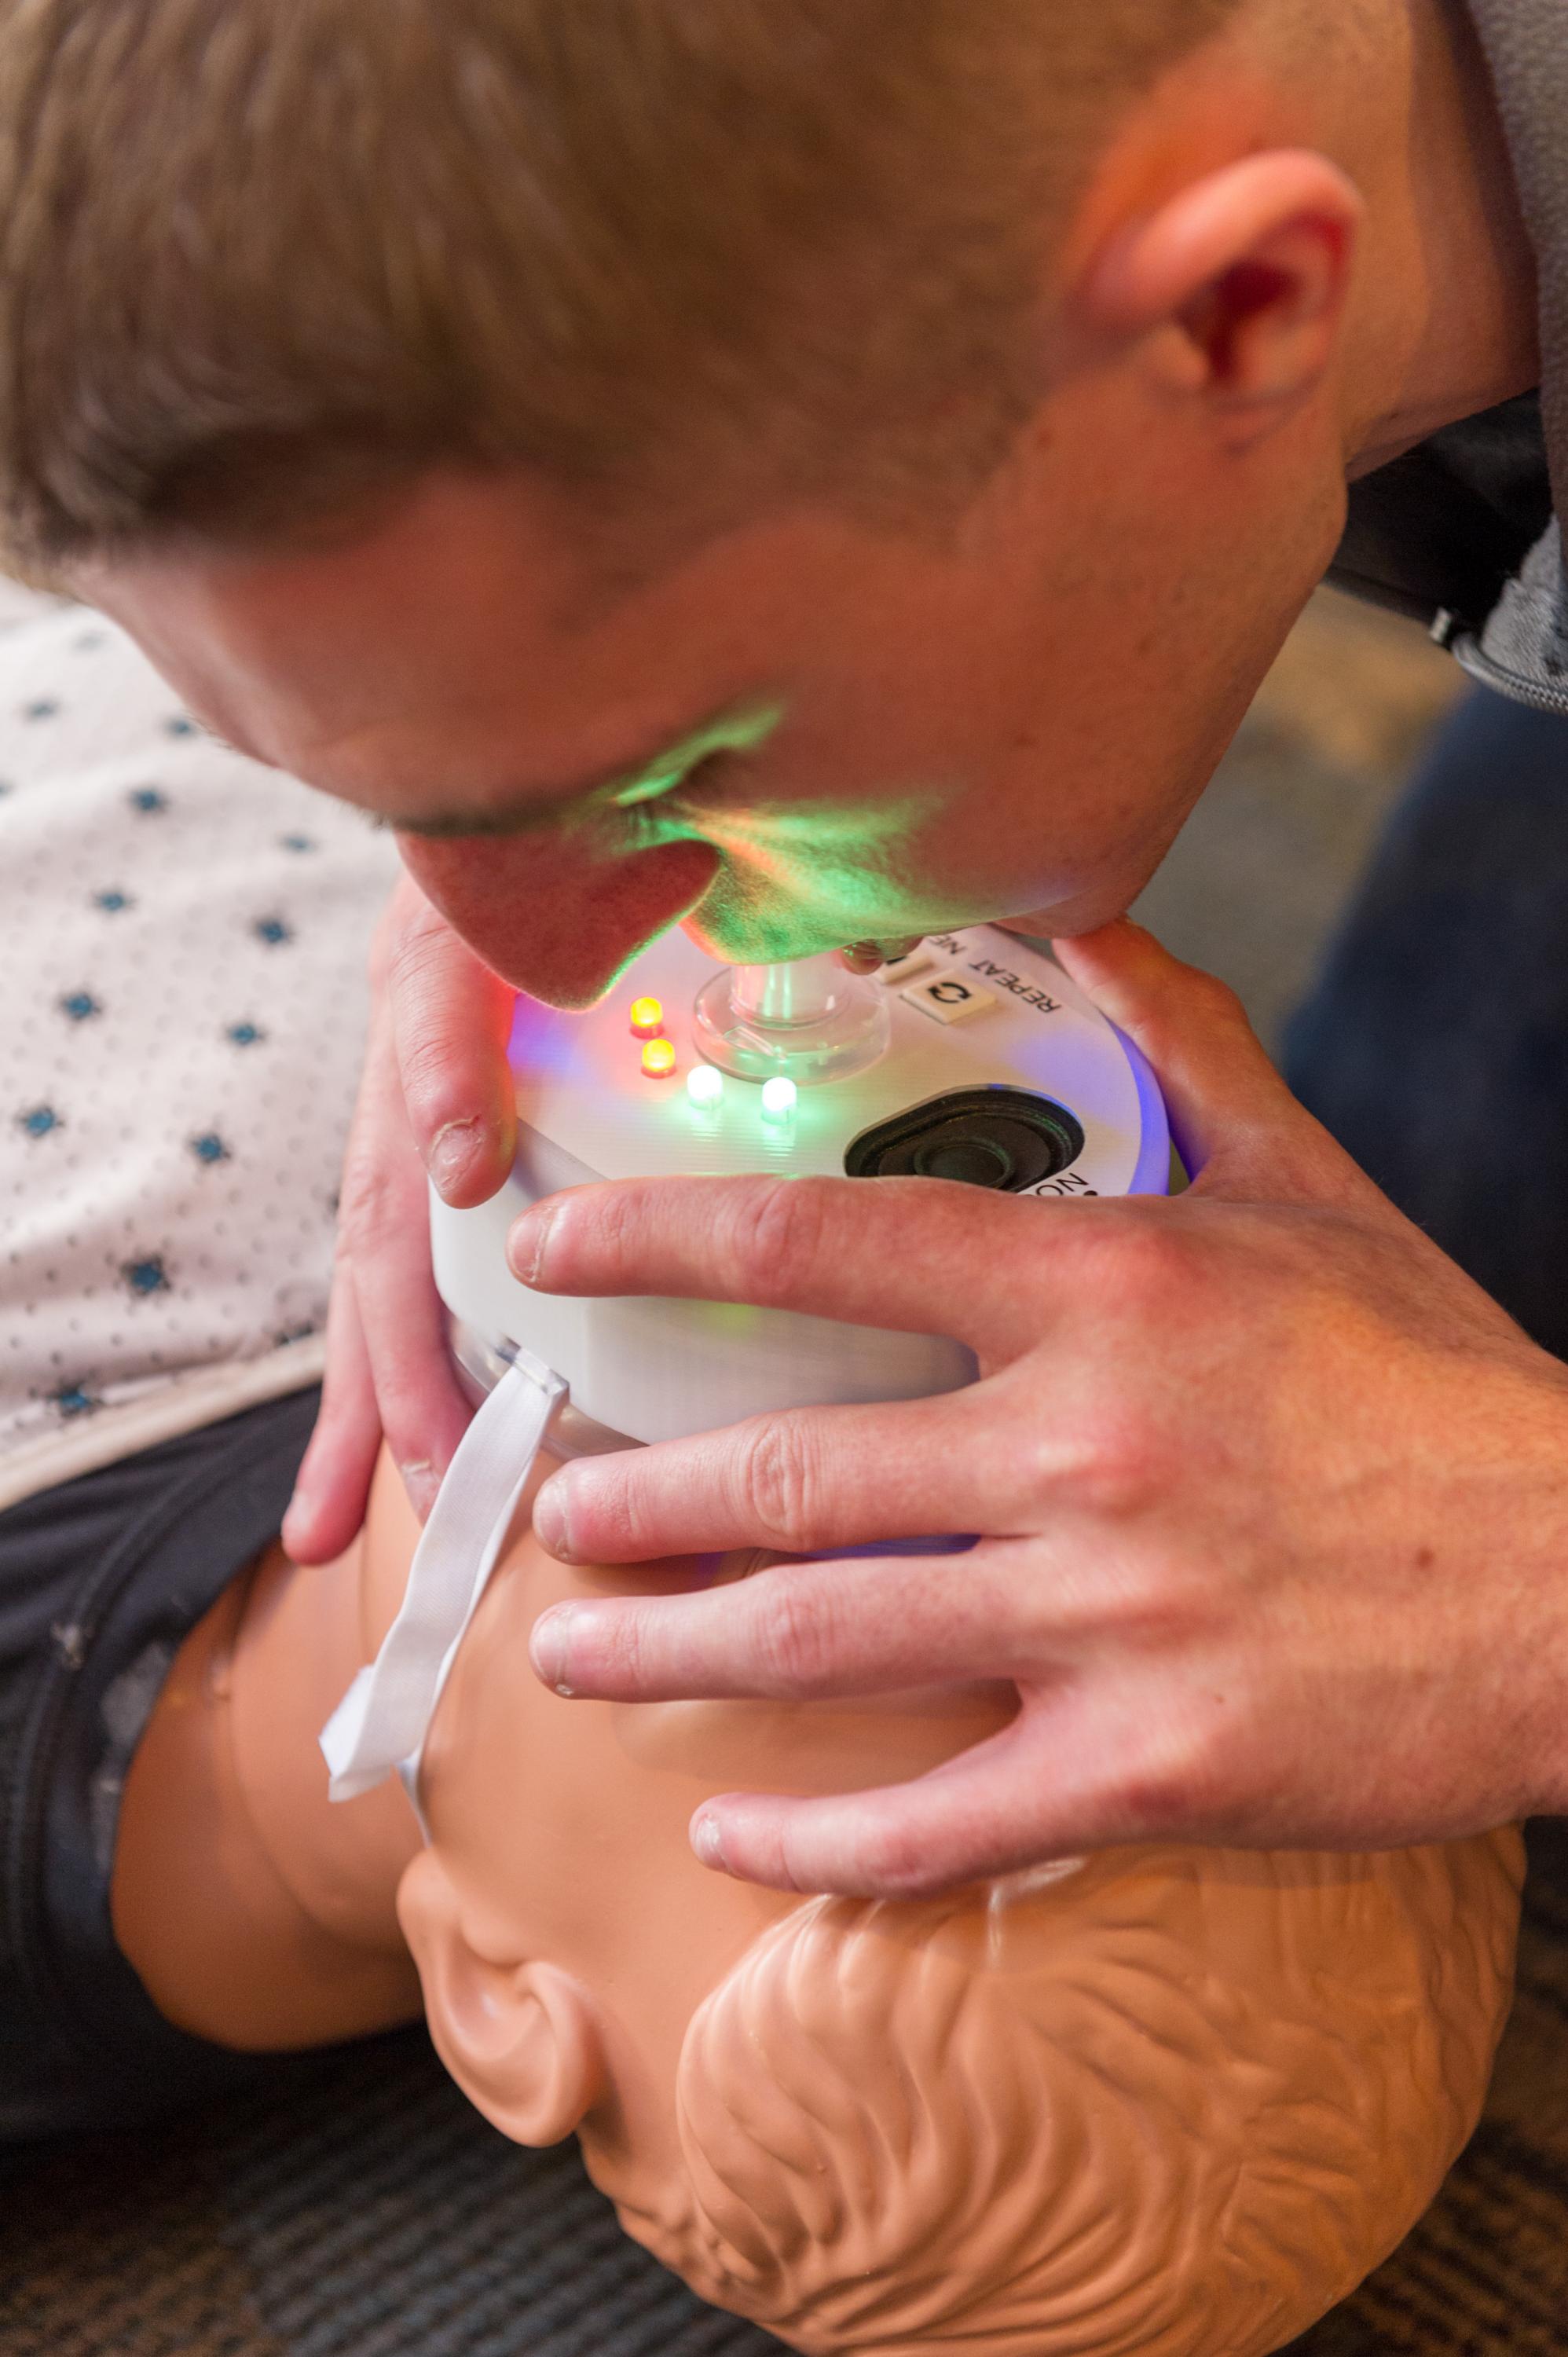 CPR+ is a CPR mask with LED lights that offers user feedback throughout the resuscitation process. The device is one of six inventions is competing for Georgia Tech’s 2017 InVenture Prize.

Ryan Williams, a computer engineering major, demonstrates delivering rescue breaths with the device. When done correctly the lights turn green.

The other inventors are: Dave Ehrlich, a computer engineering major, and Samuel Clarke, a mechanical engineering and computer science major.

Photo by Rob Felt. 